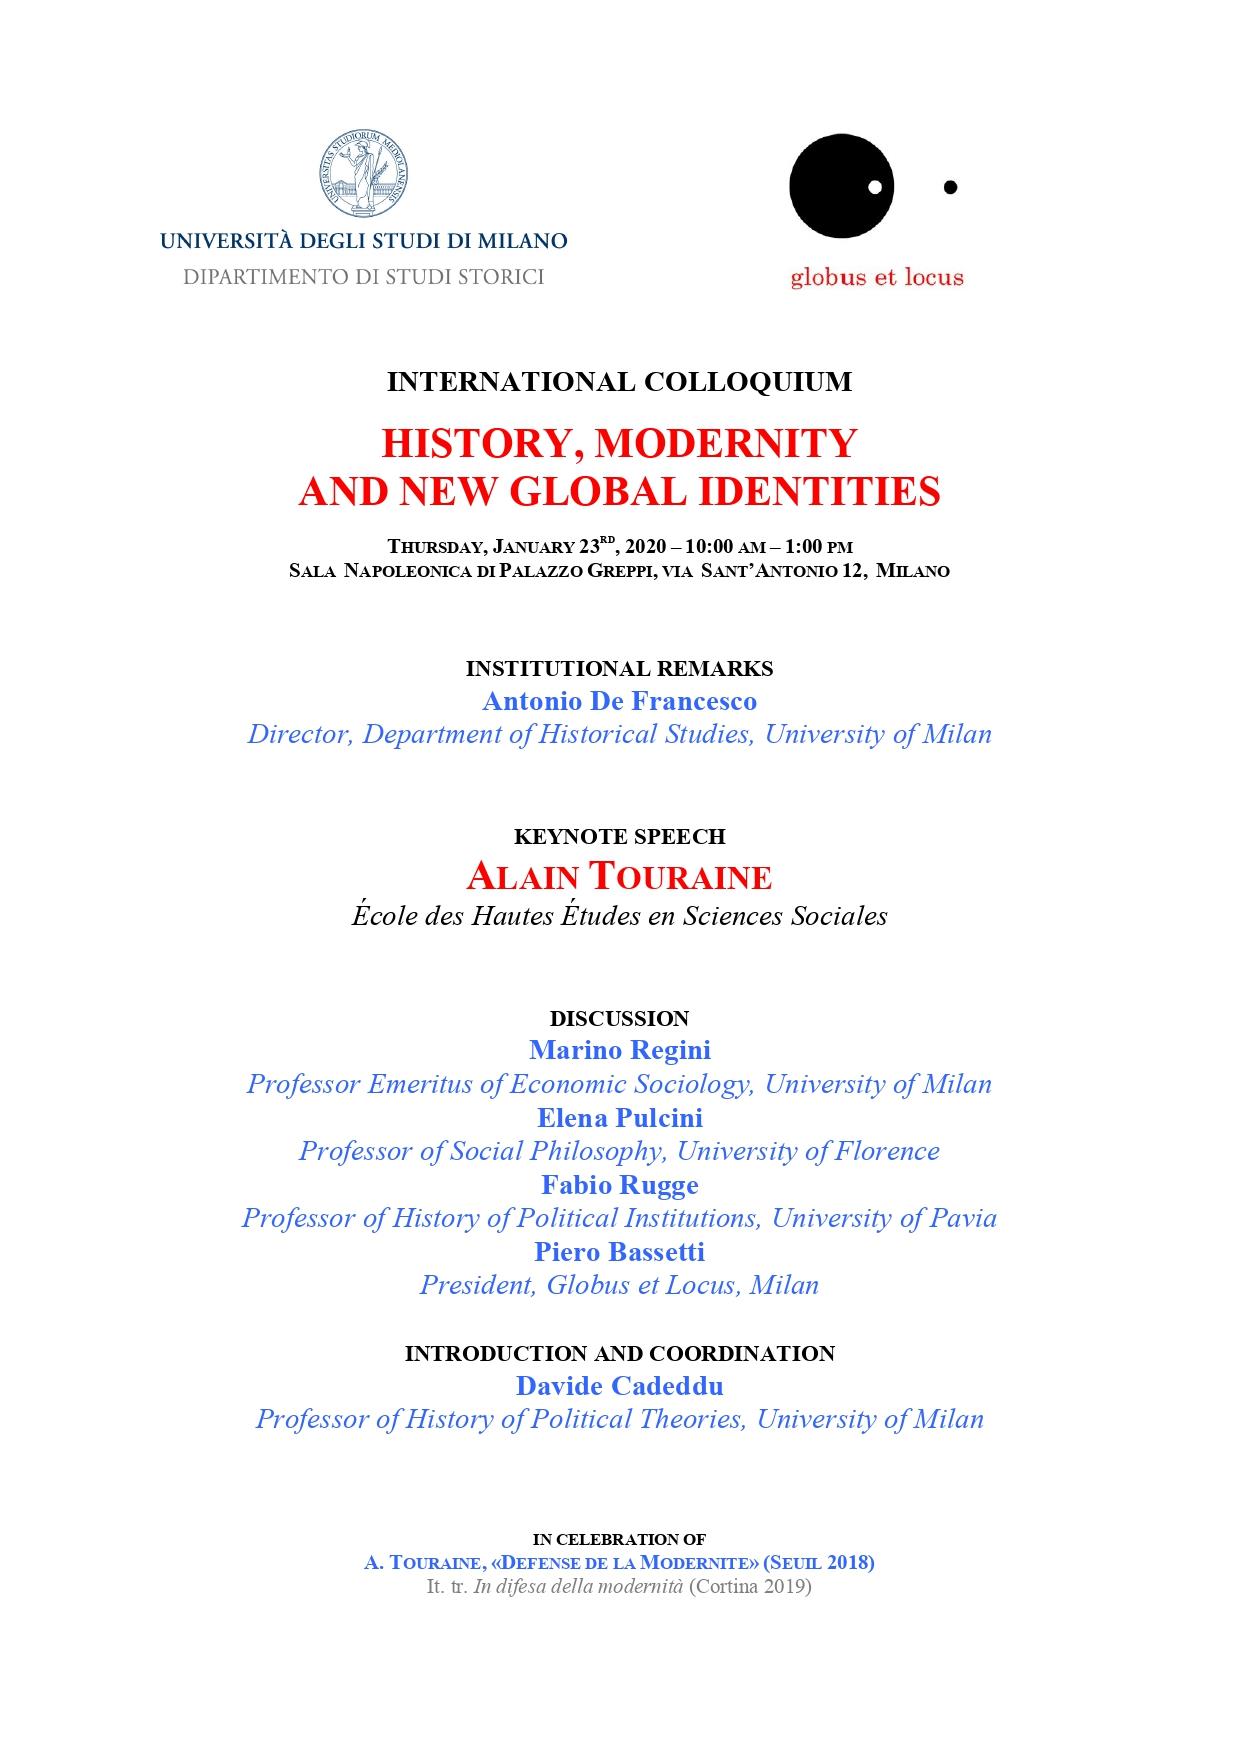 History, modernity and new global identities